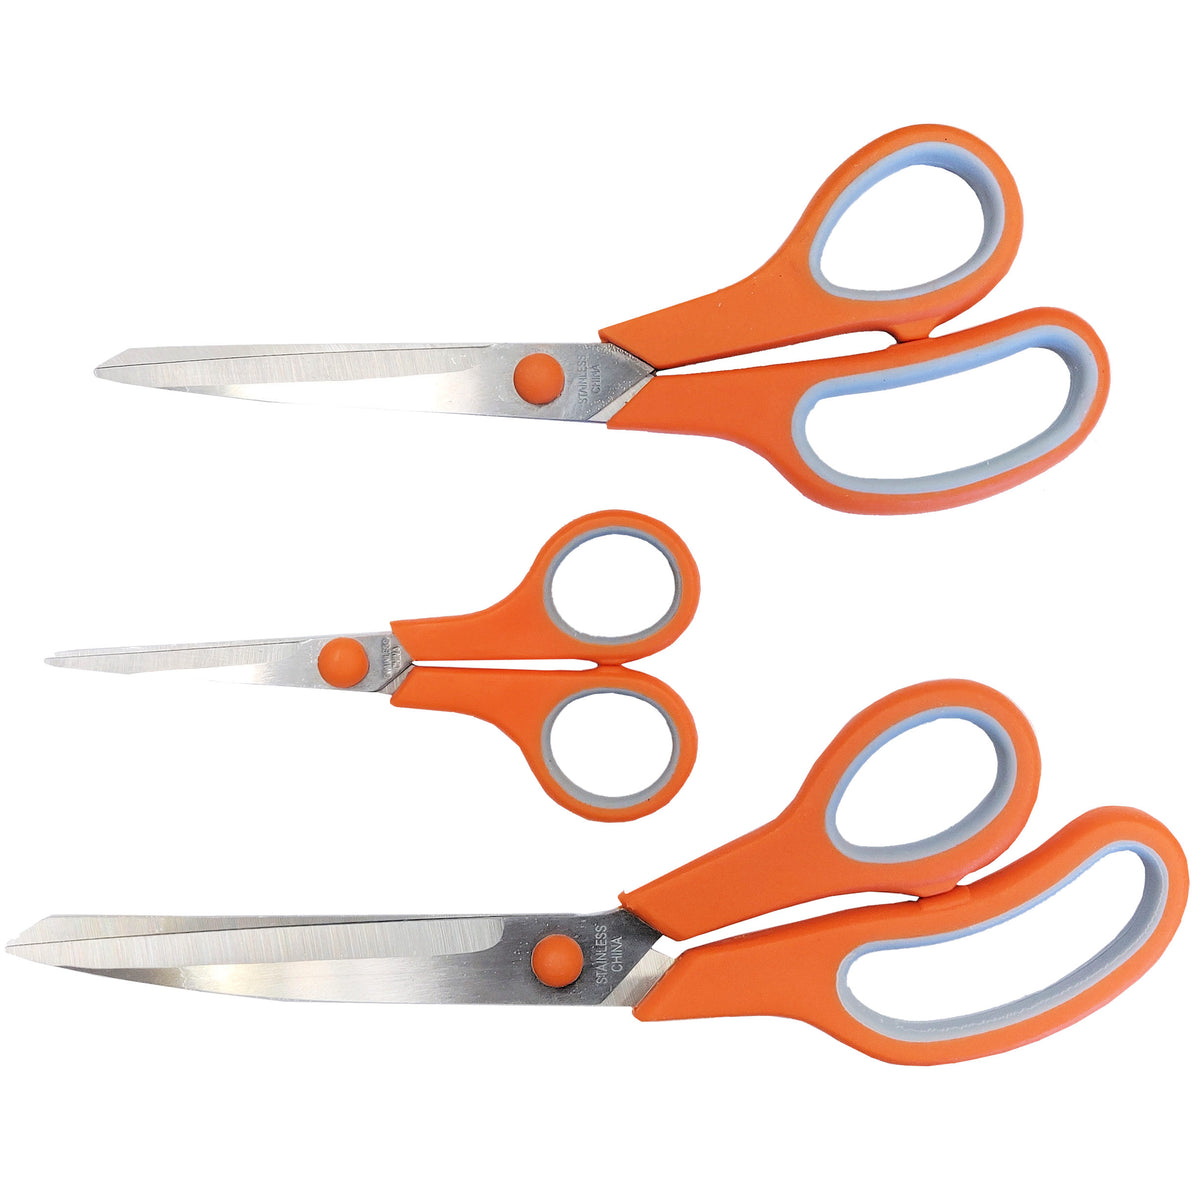 embroidery floss storage Archives - Red-Handled Scissors